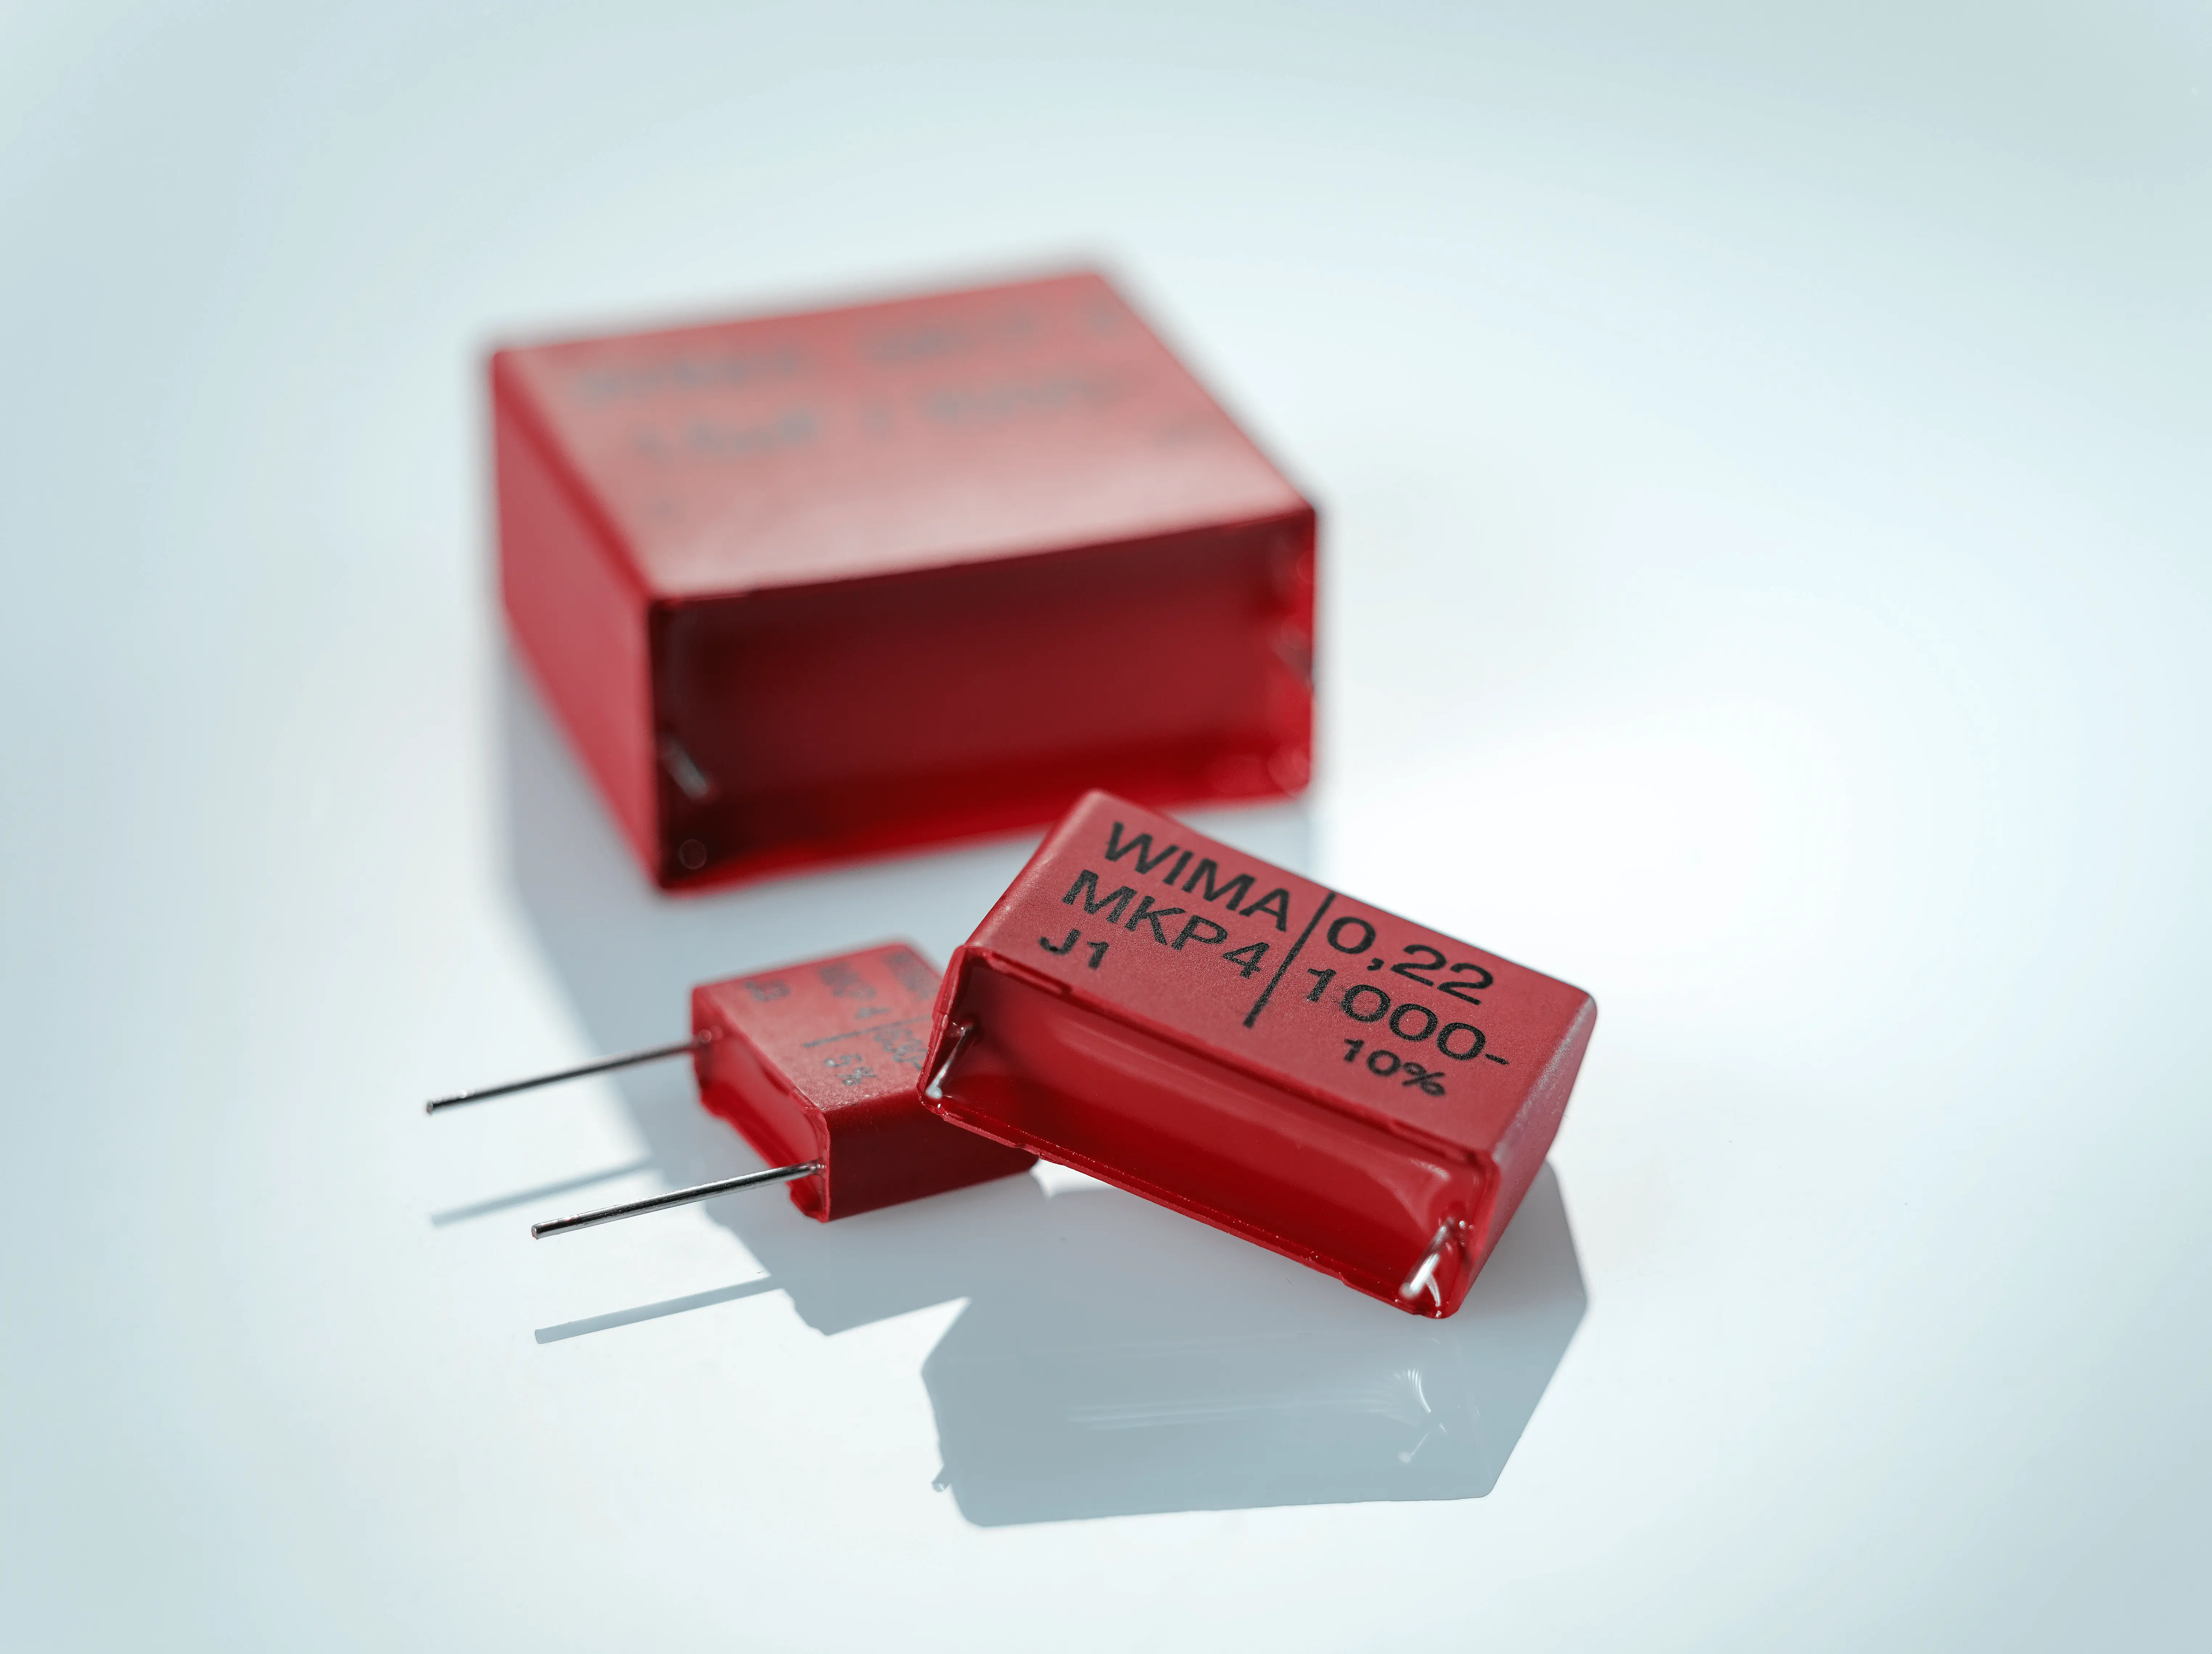 MKP film capacitor from WIMA